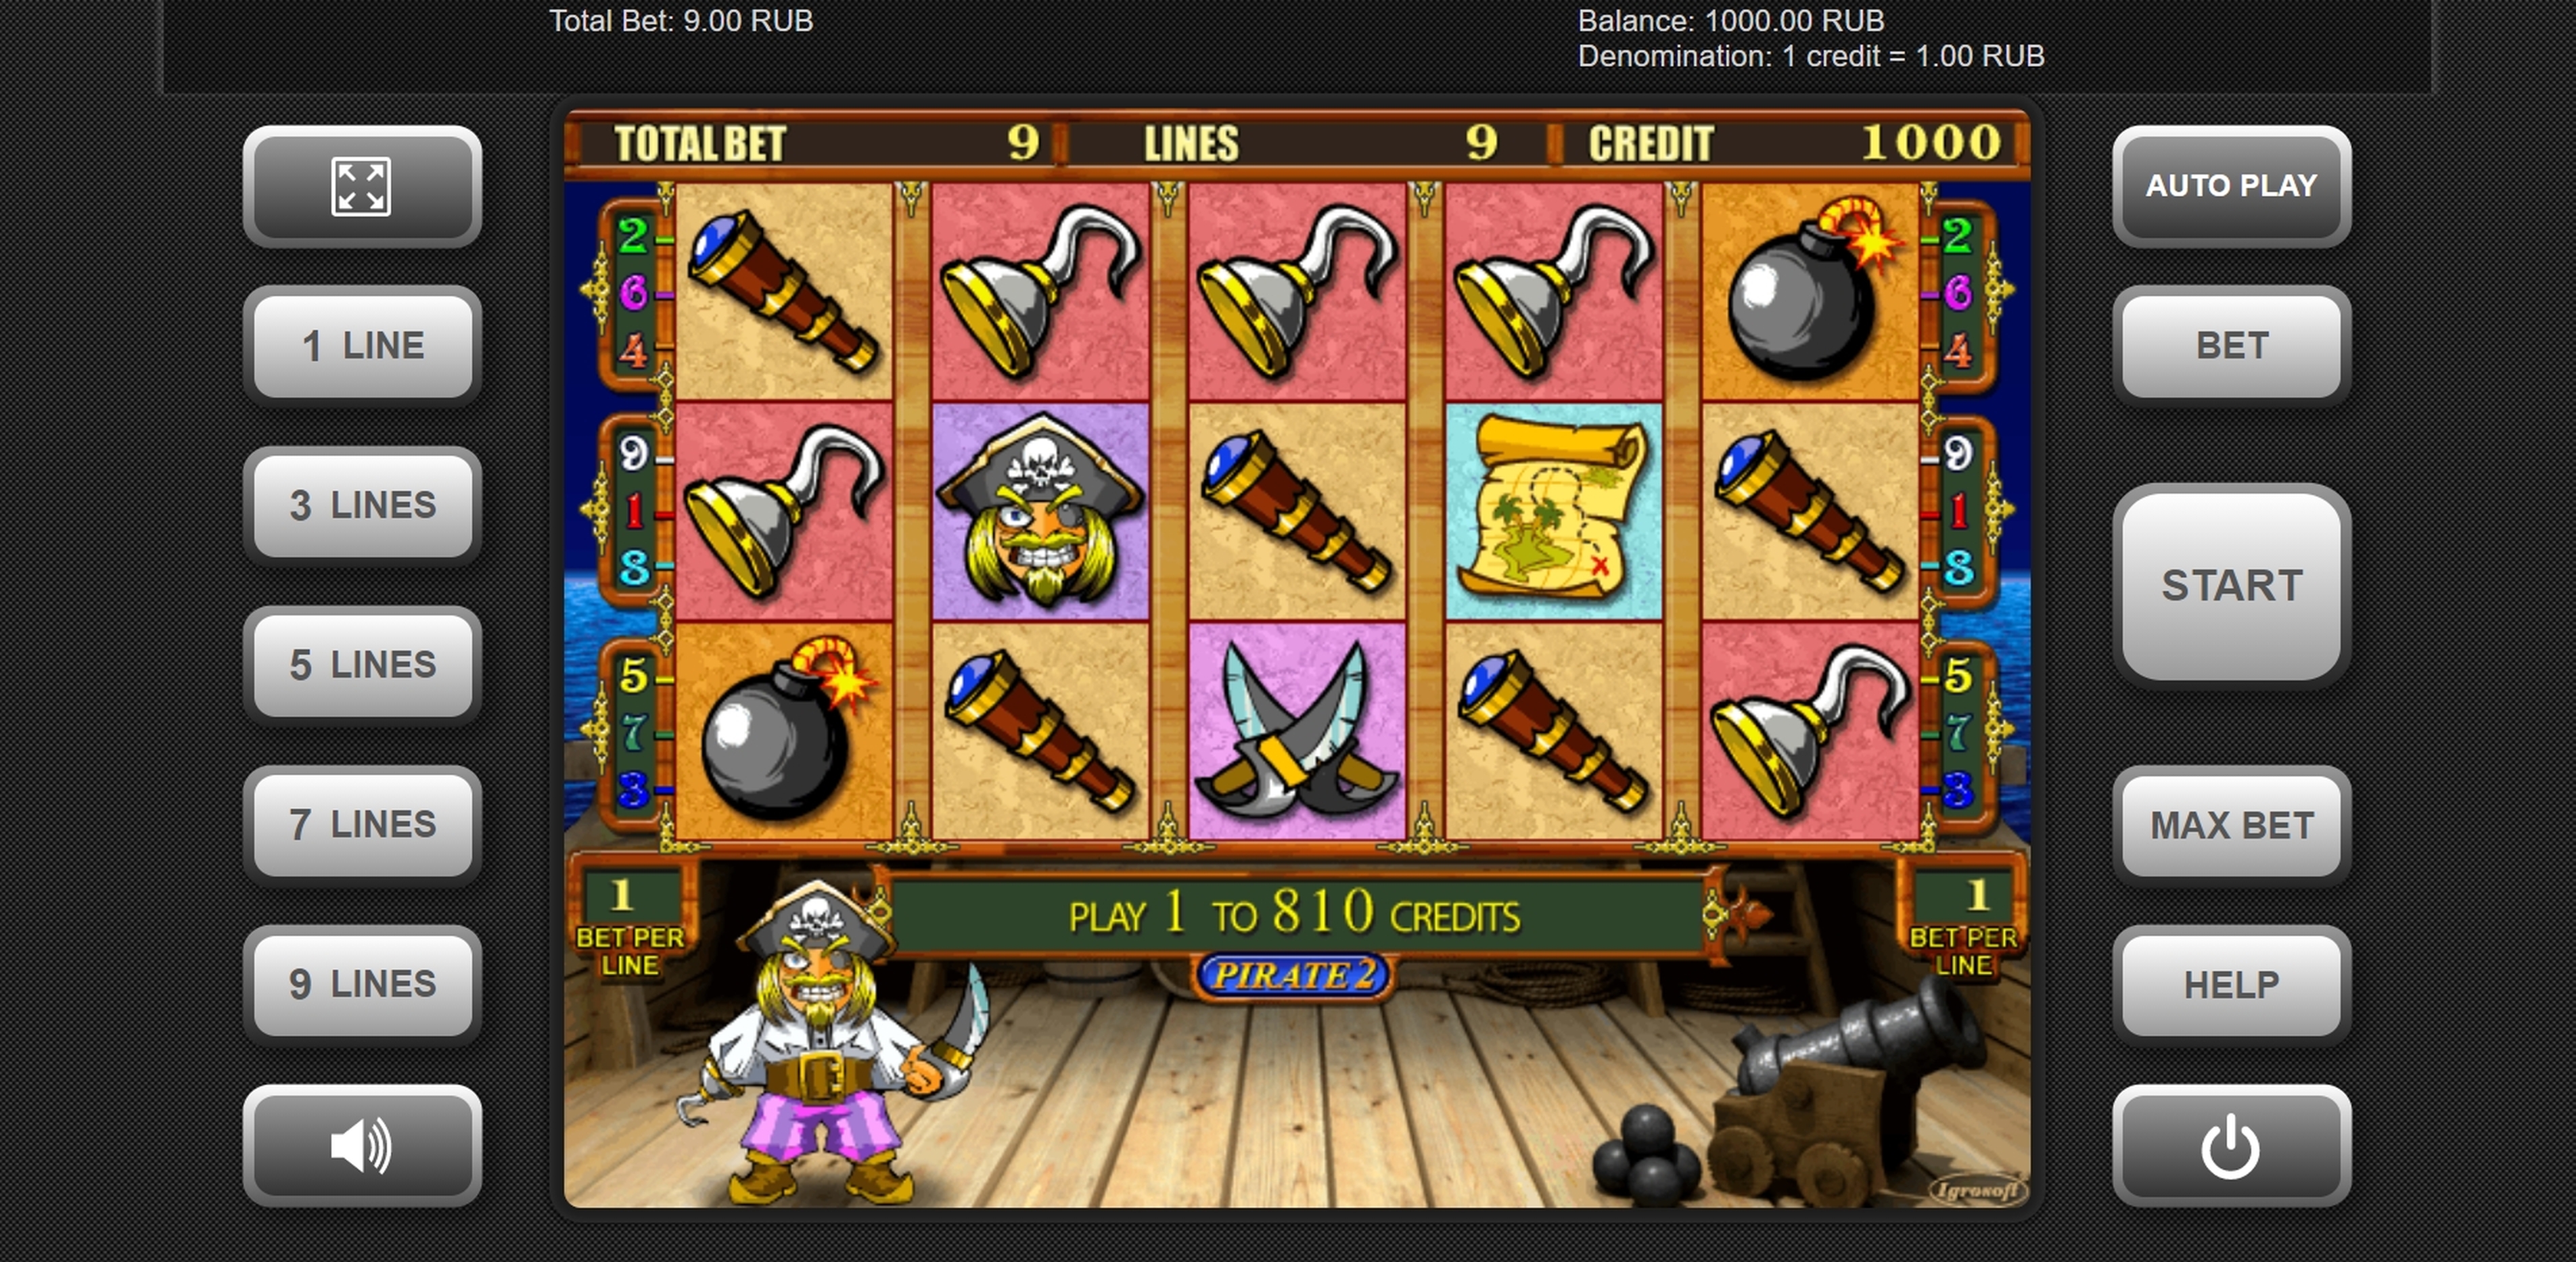 Reels in Pirate 2 Slot Game by Igrosoft